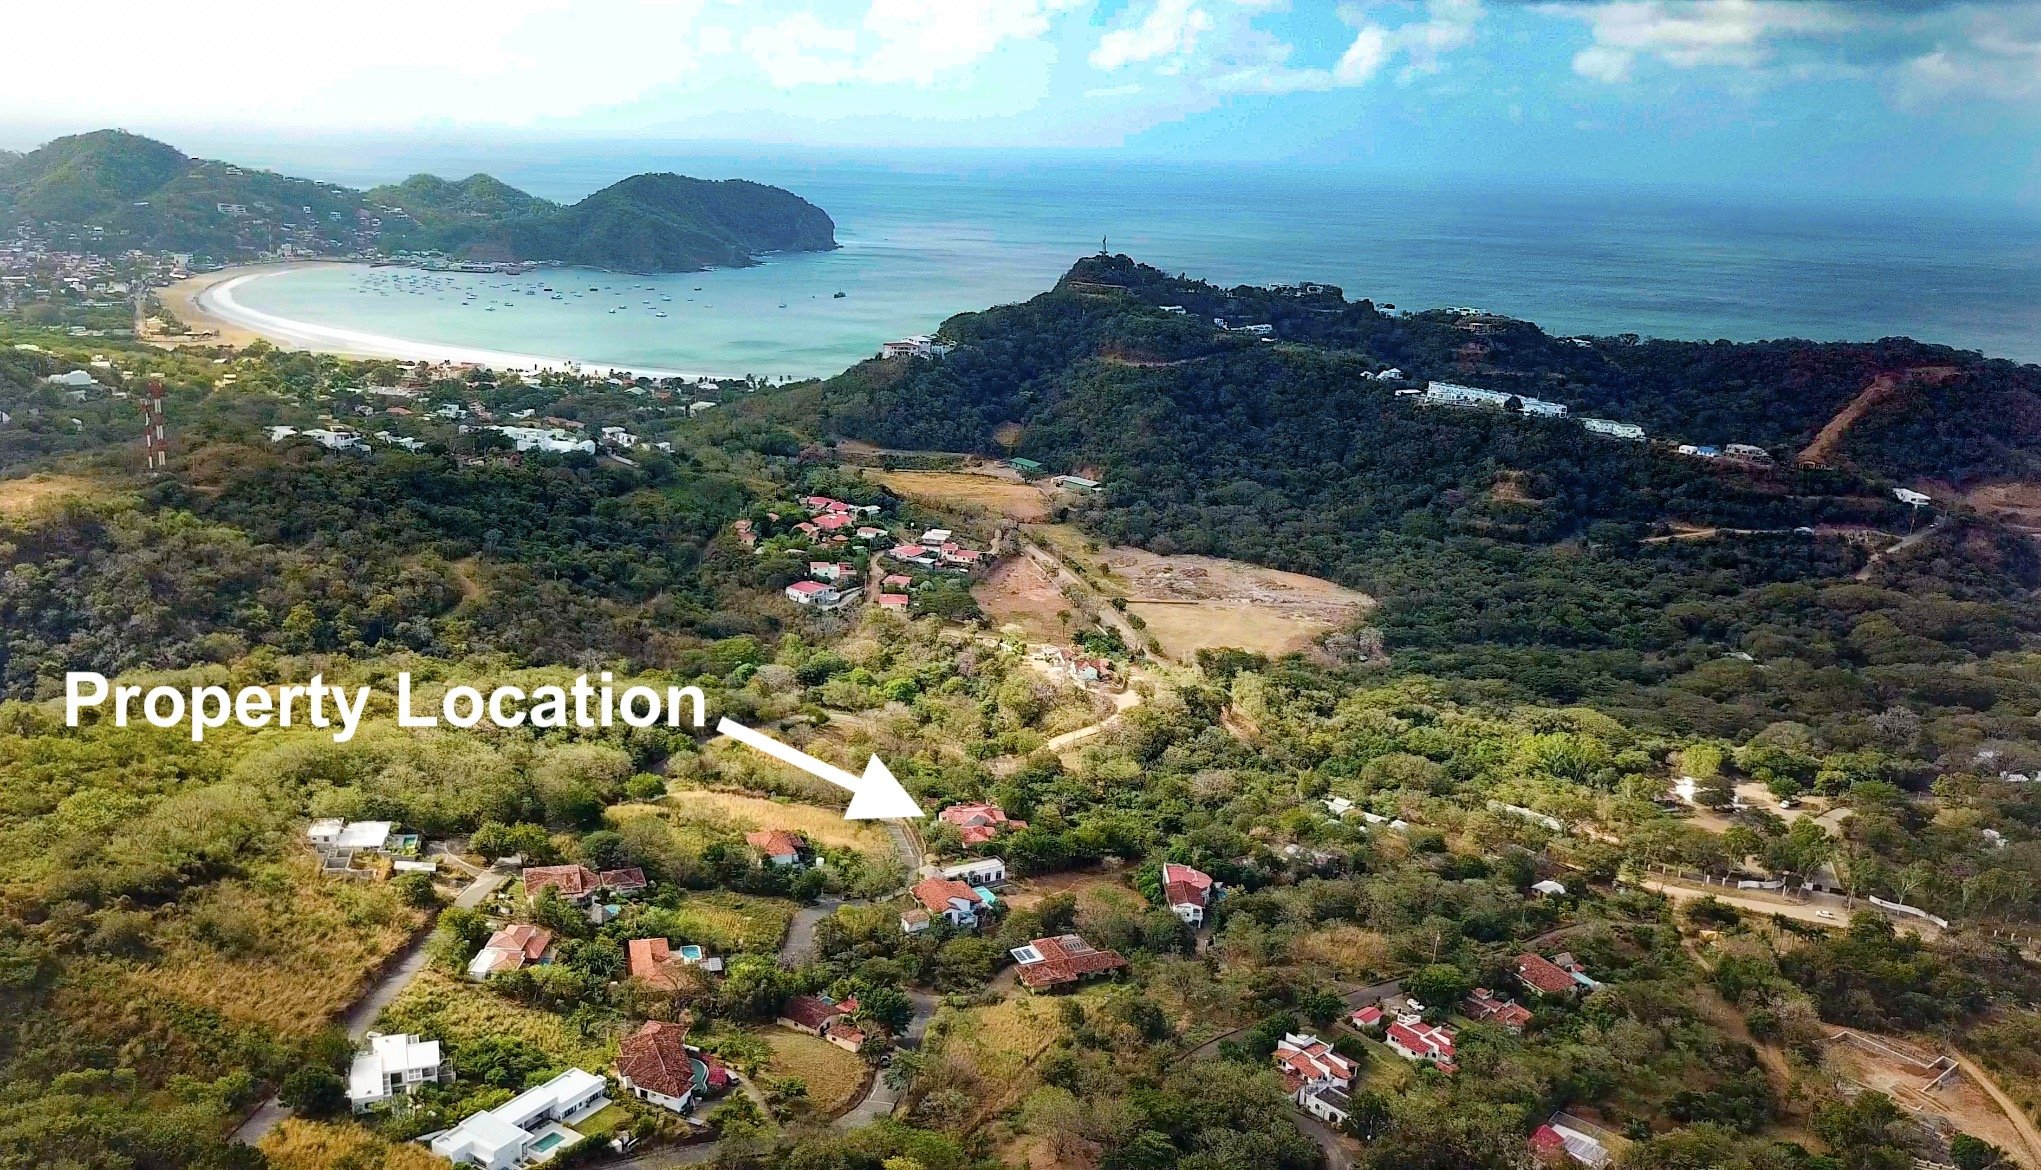 Large Ocean View Property for Sale in San Juan Del Sur Nicaragua Property Close to the beach.jpeg